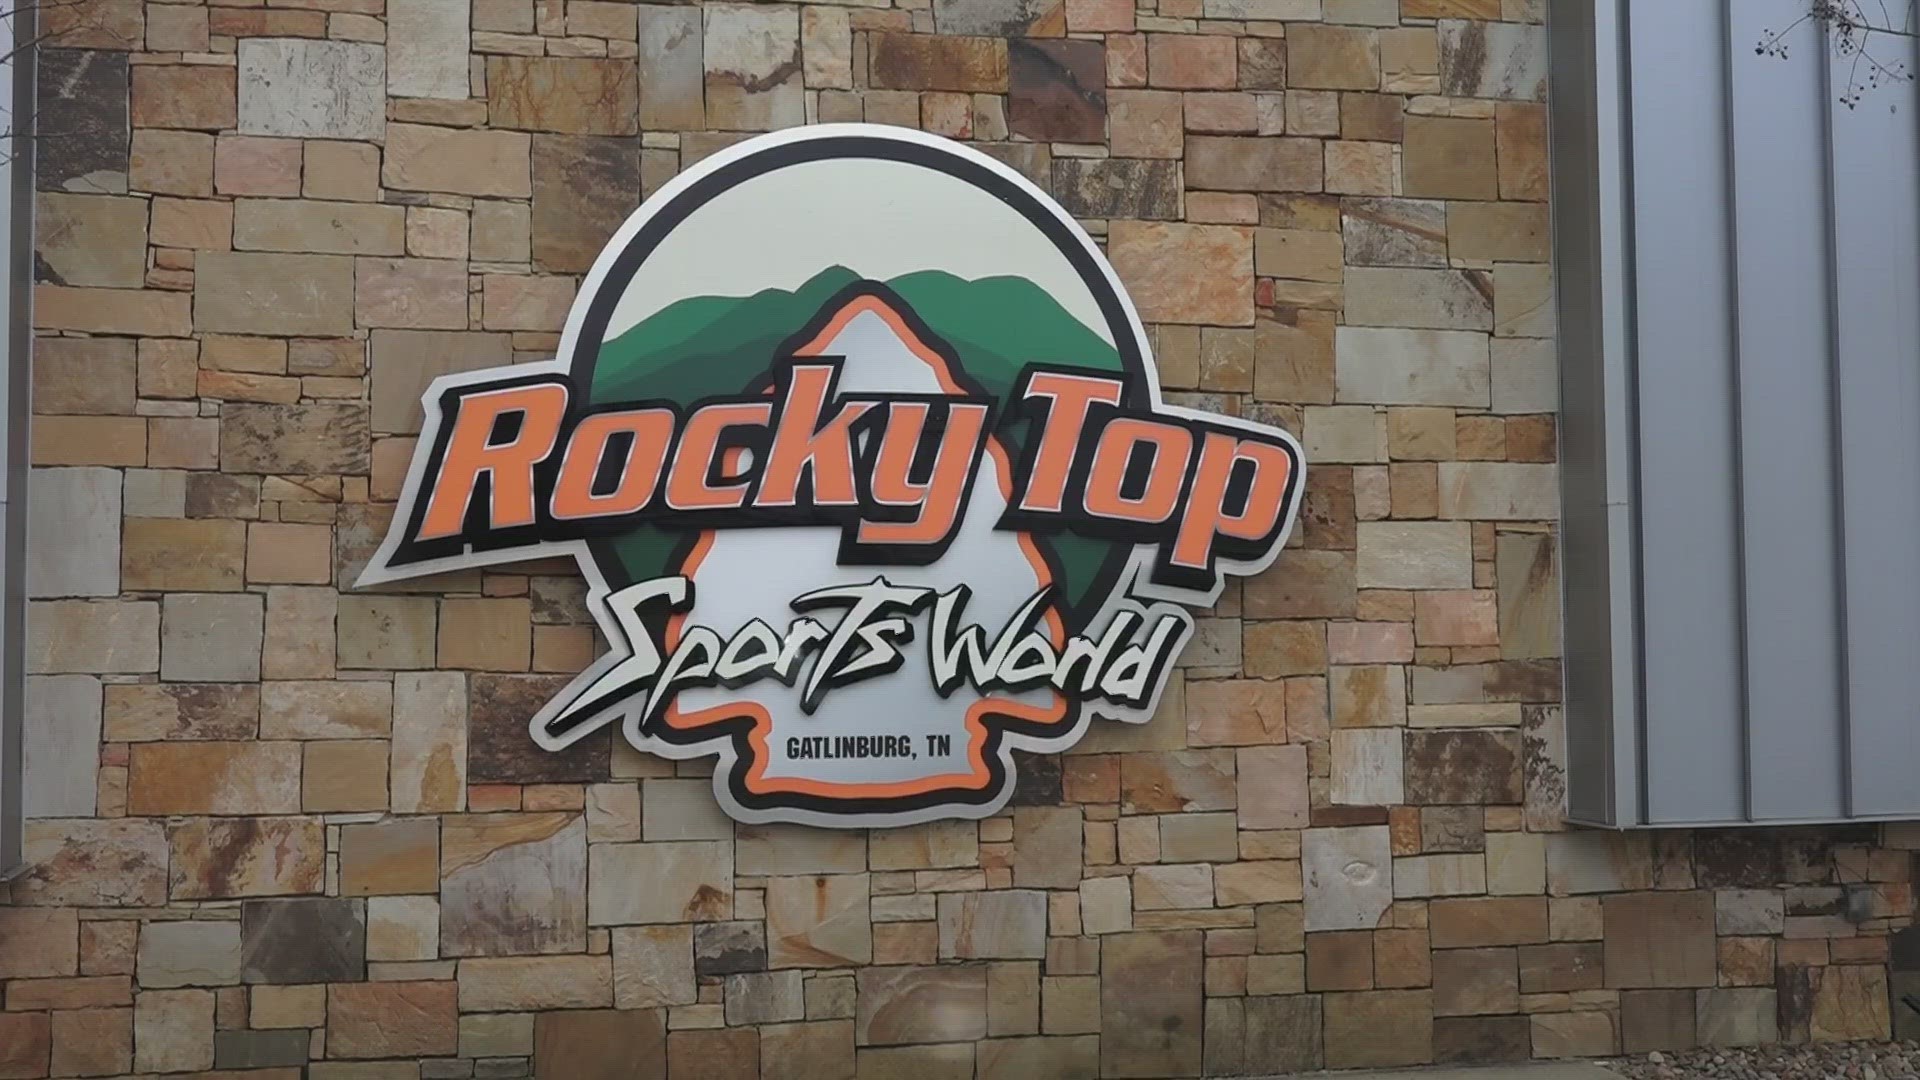 Rocky Top Sports World hosts a number of local sporting activities including tournaments and basketball camp.